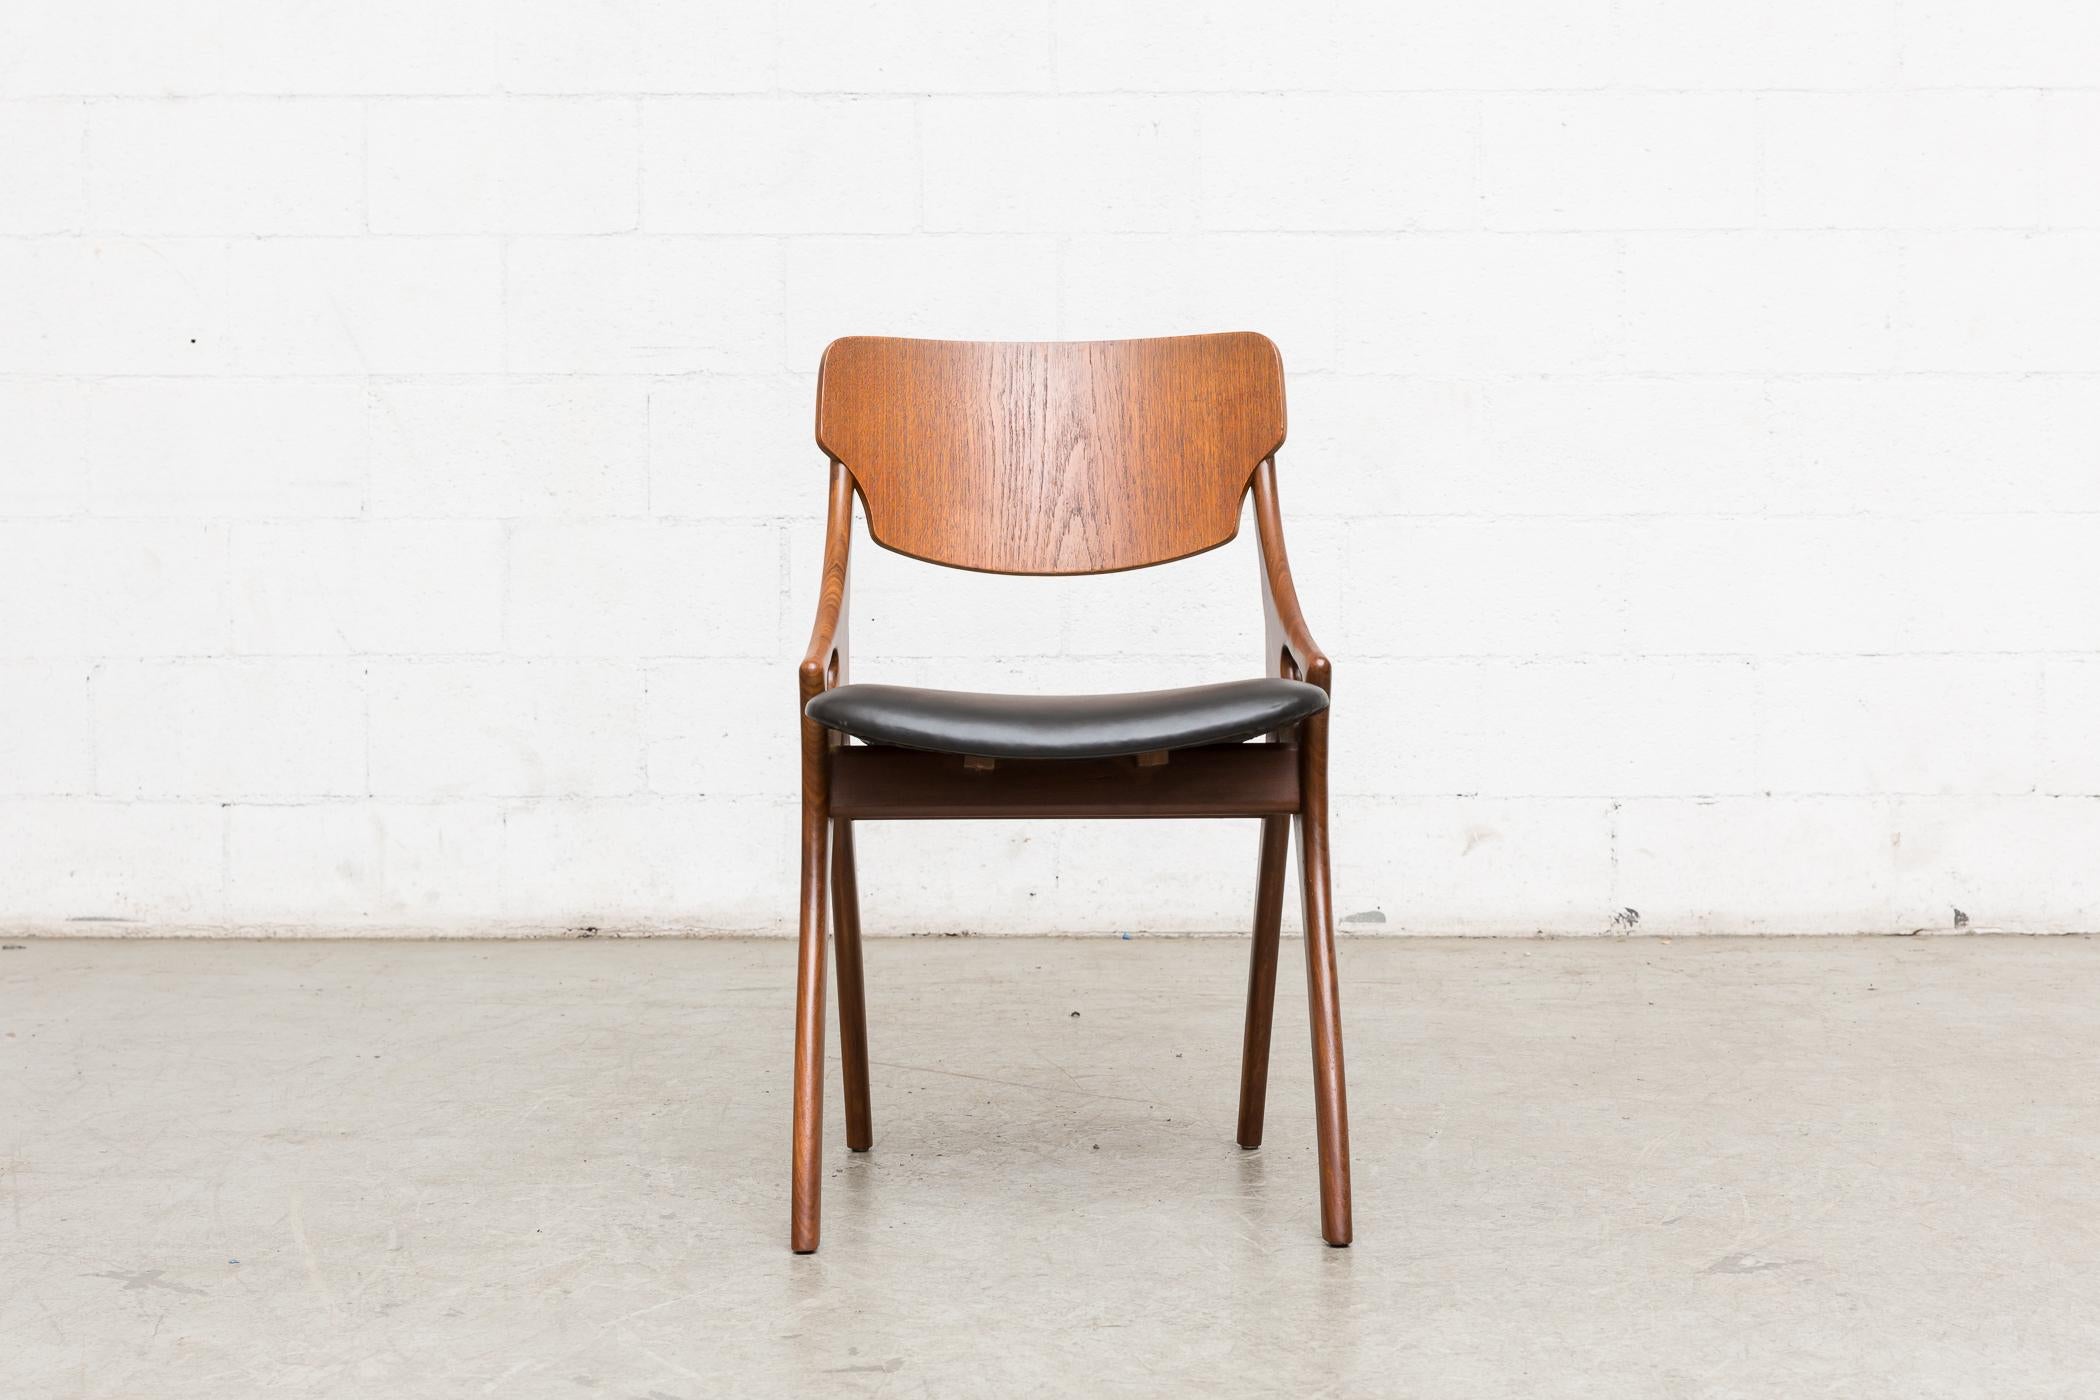 Set of six teak dining chairs by Arne Hovmand Olsen for Mogens Kold. Manufactured in the 1950s, Denmark. Each chair features organically sculpted teak arms with teak backrests and original black skai seating with visible wear. All the chairs are in